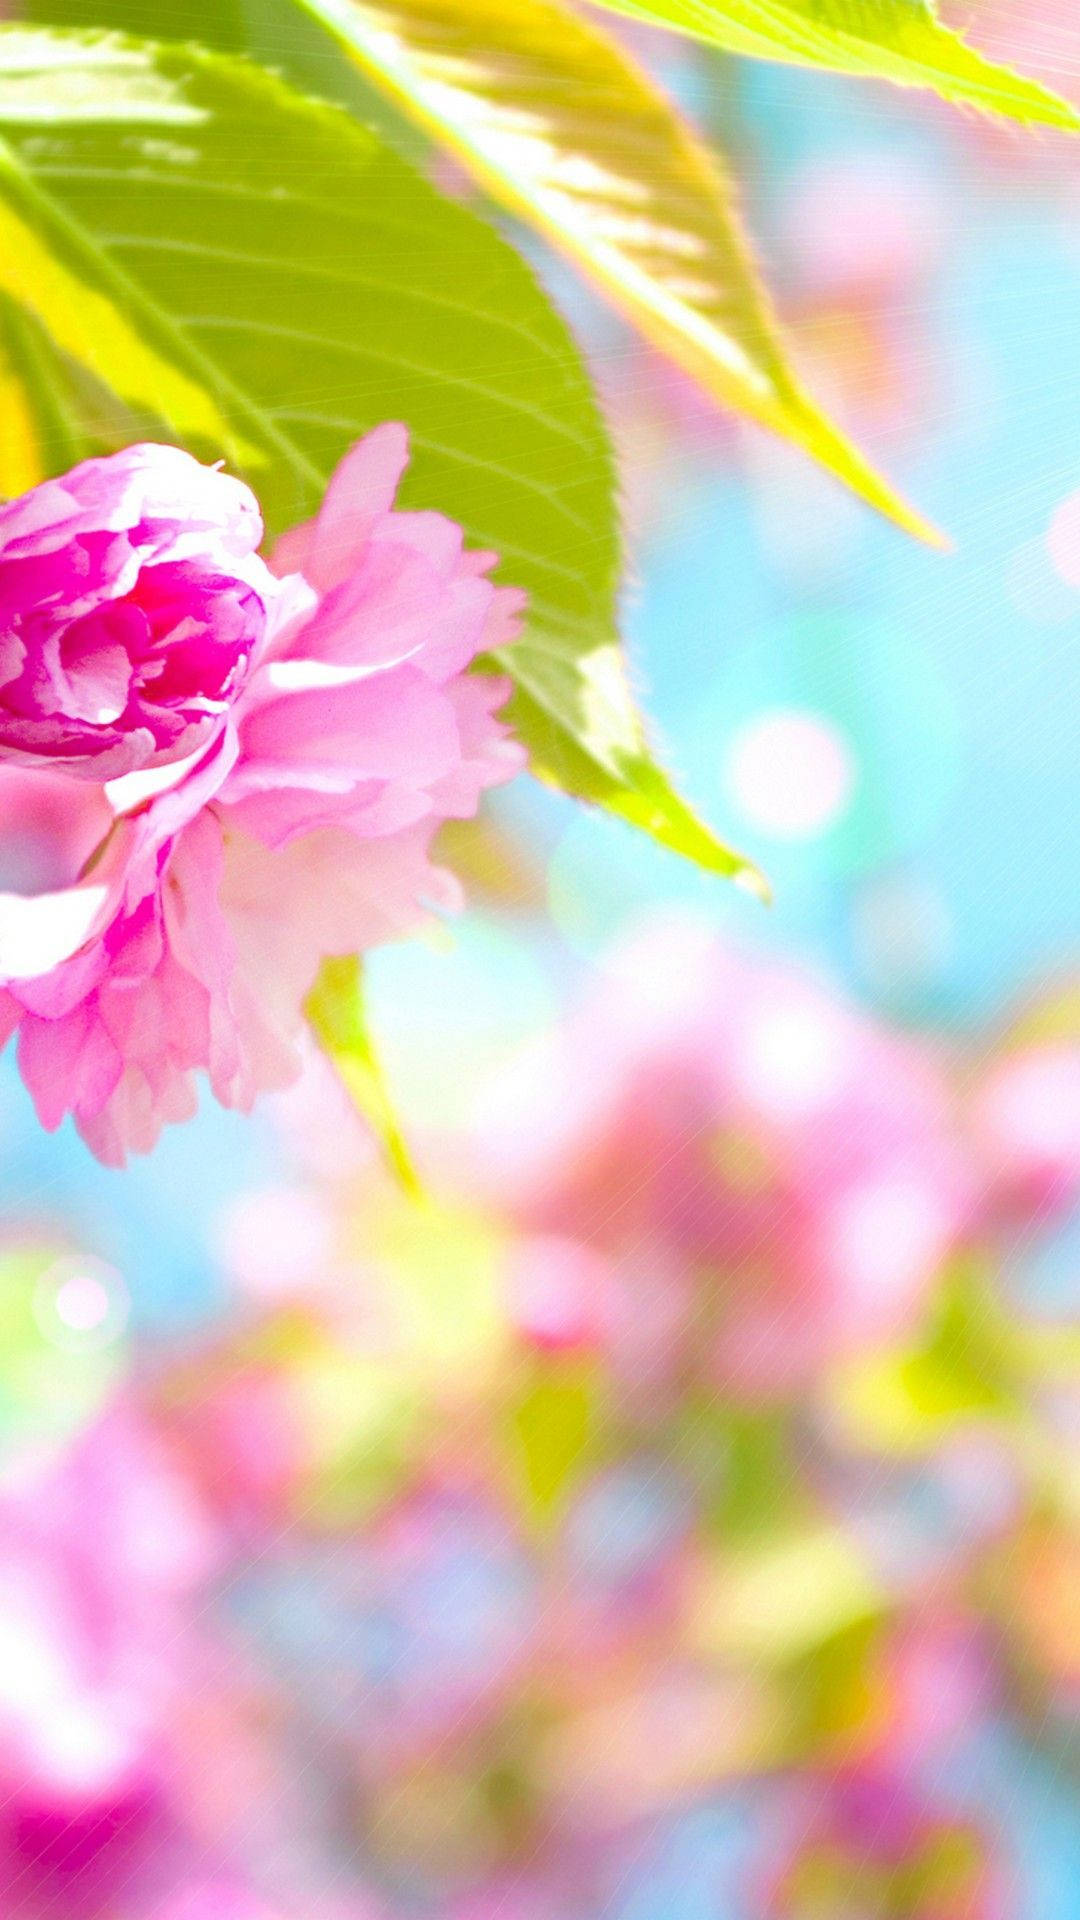 Bring On The Fun of Spring With This Cute New Phone Wallpaper